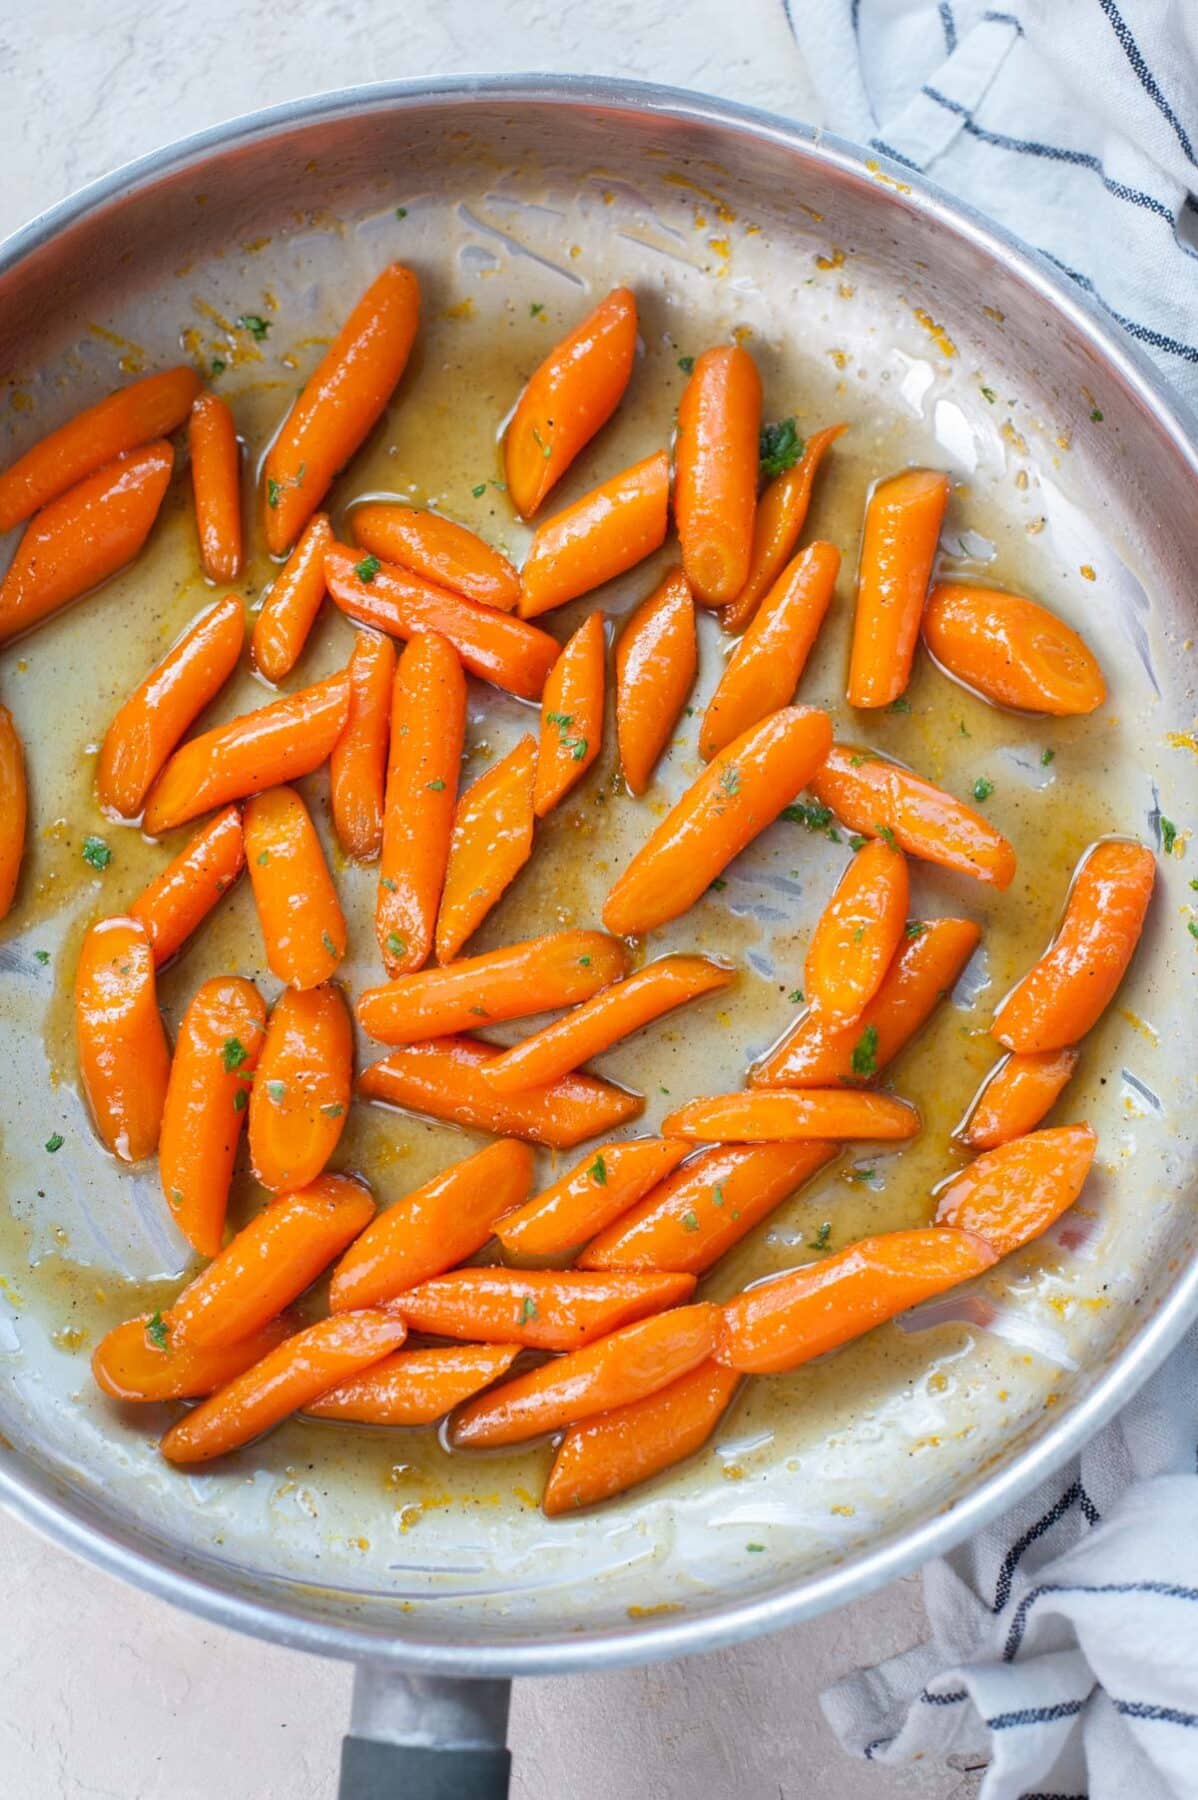 Honey glazed carrots in a frying pan sprinkled with parsley.